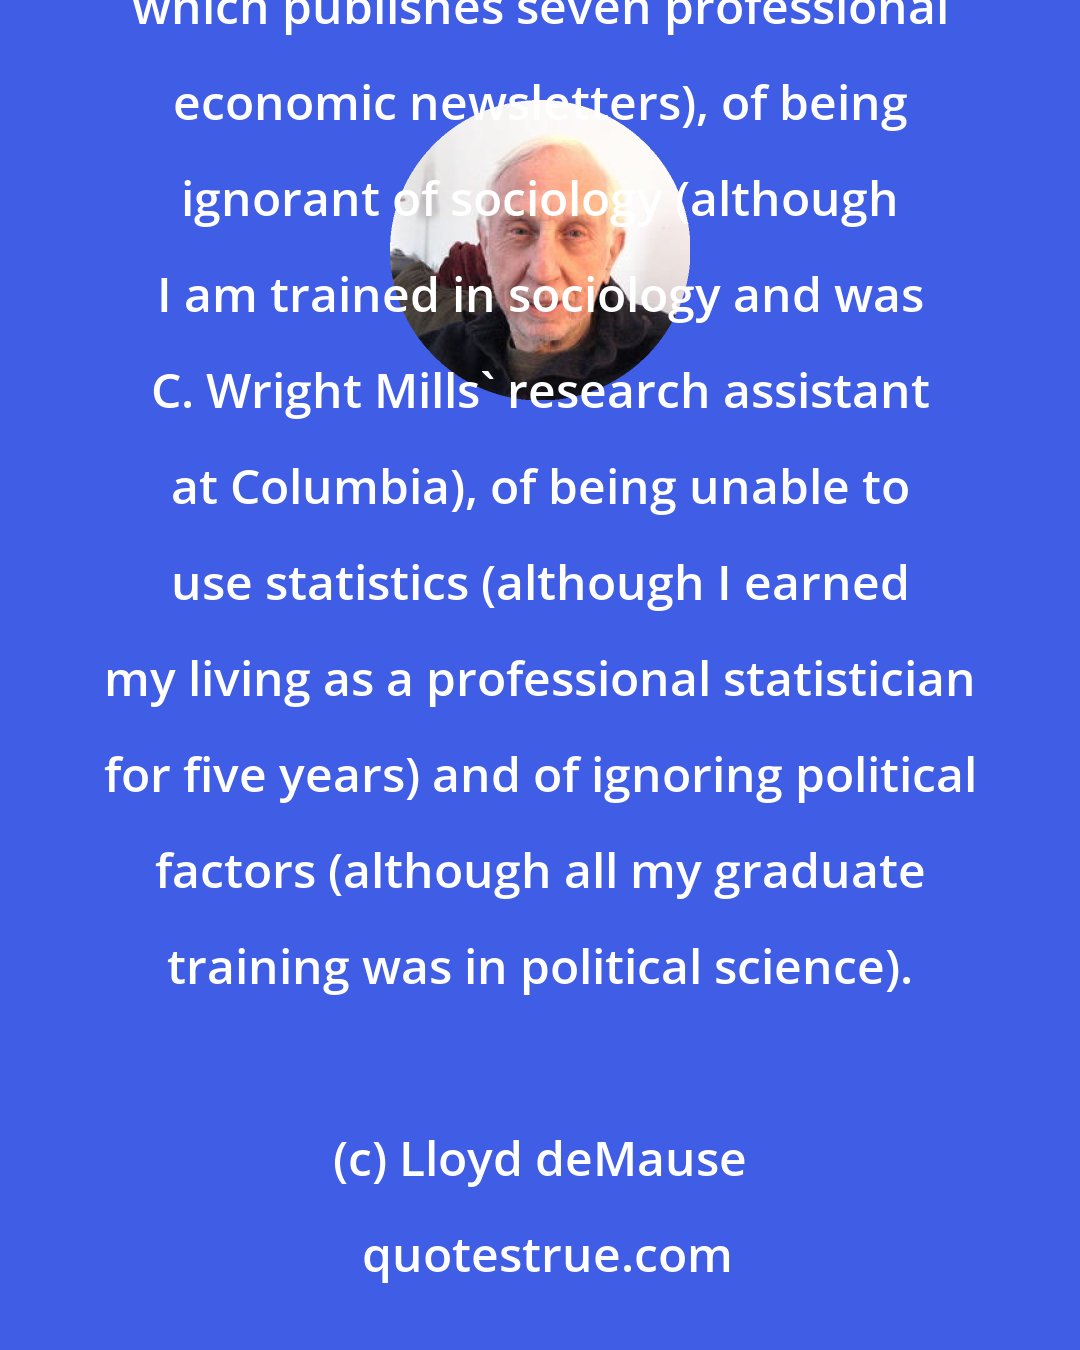 Lloyd deMause: I have been accused of being ignorant of economics (although I am the founder and Chairman of the Board of a company which publishes seven professional economic newsletters), of being ignorant of sociology (although I am trained in sociology and was C. Wright Mills' research assistant at Columbia), of being unable to use statistics (although I earned my living as a professional statistician for five years) and of ignoring political factors (although all my graduate training was in political science).